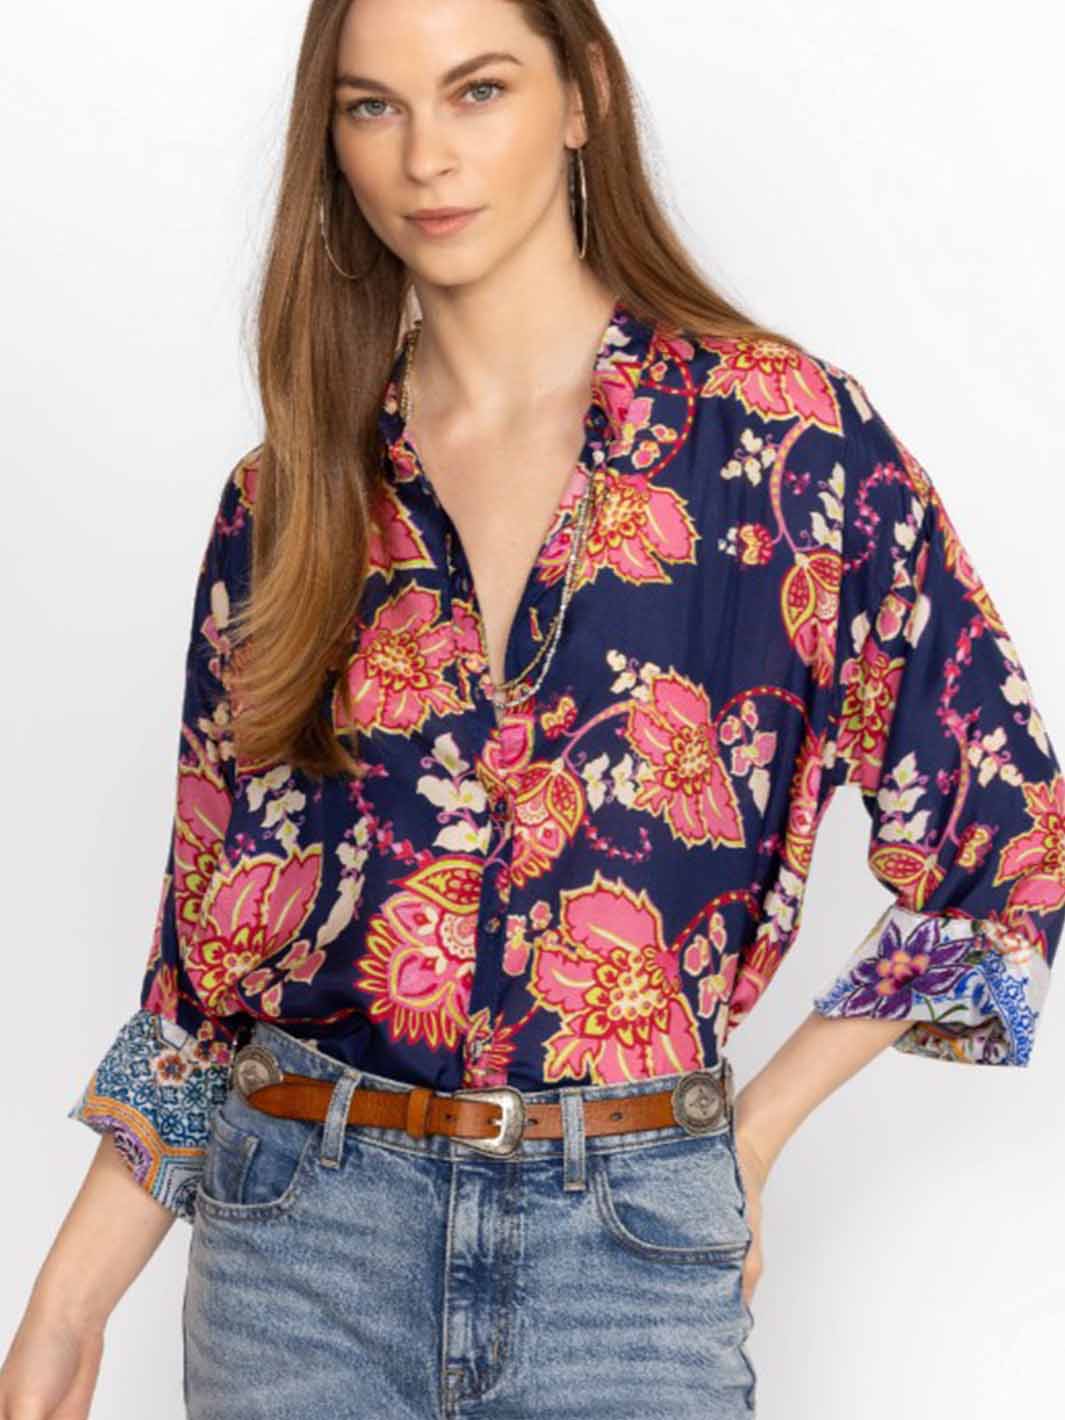 Montreux Blouse in Multi